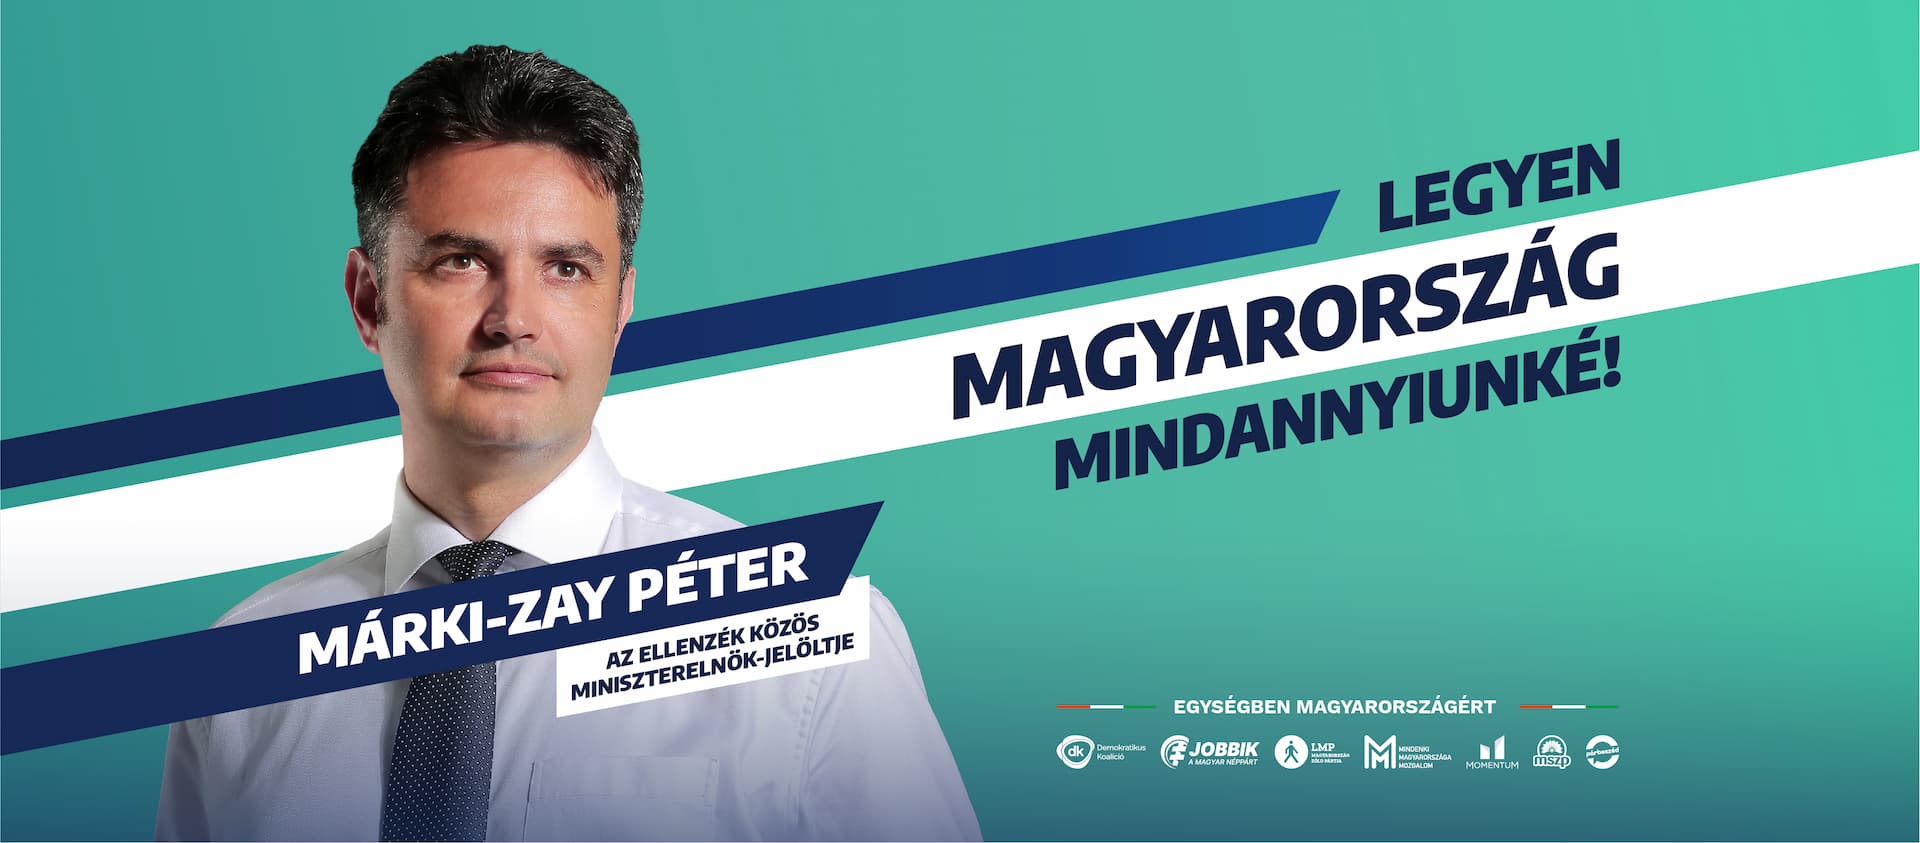 Márki-Zay Challenges PM Orbán to Debate 'Future of Hungary'